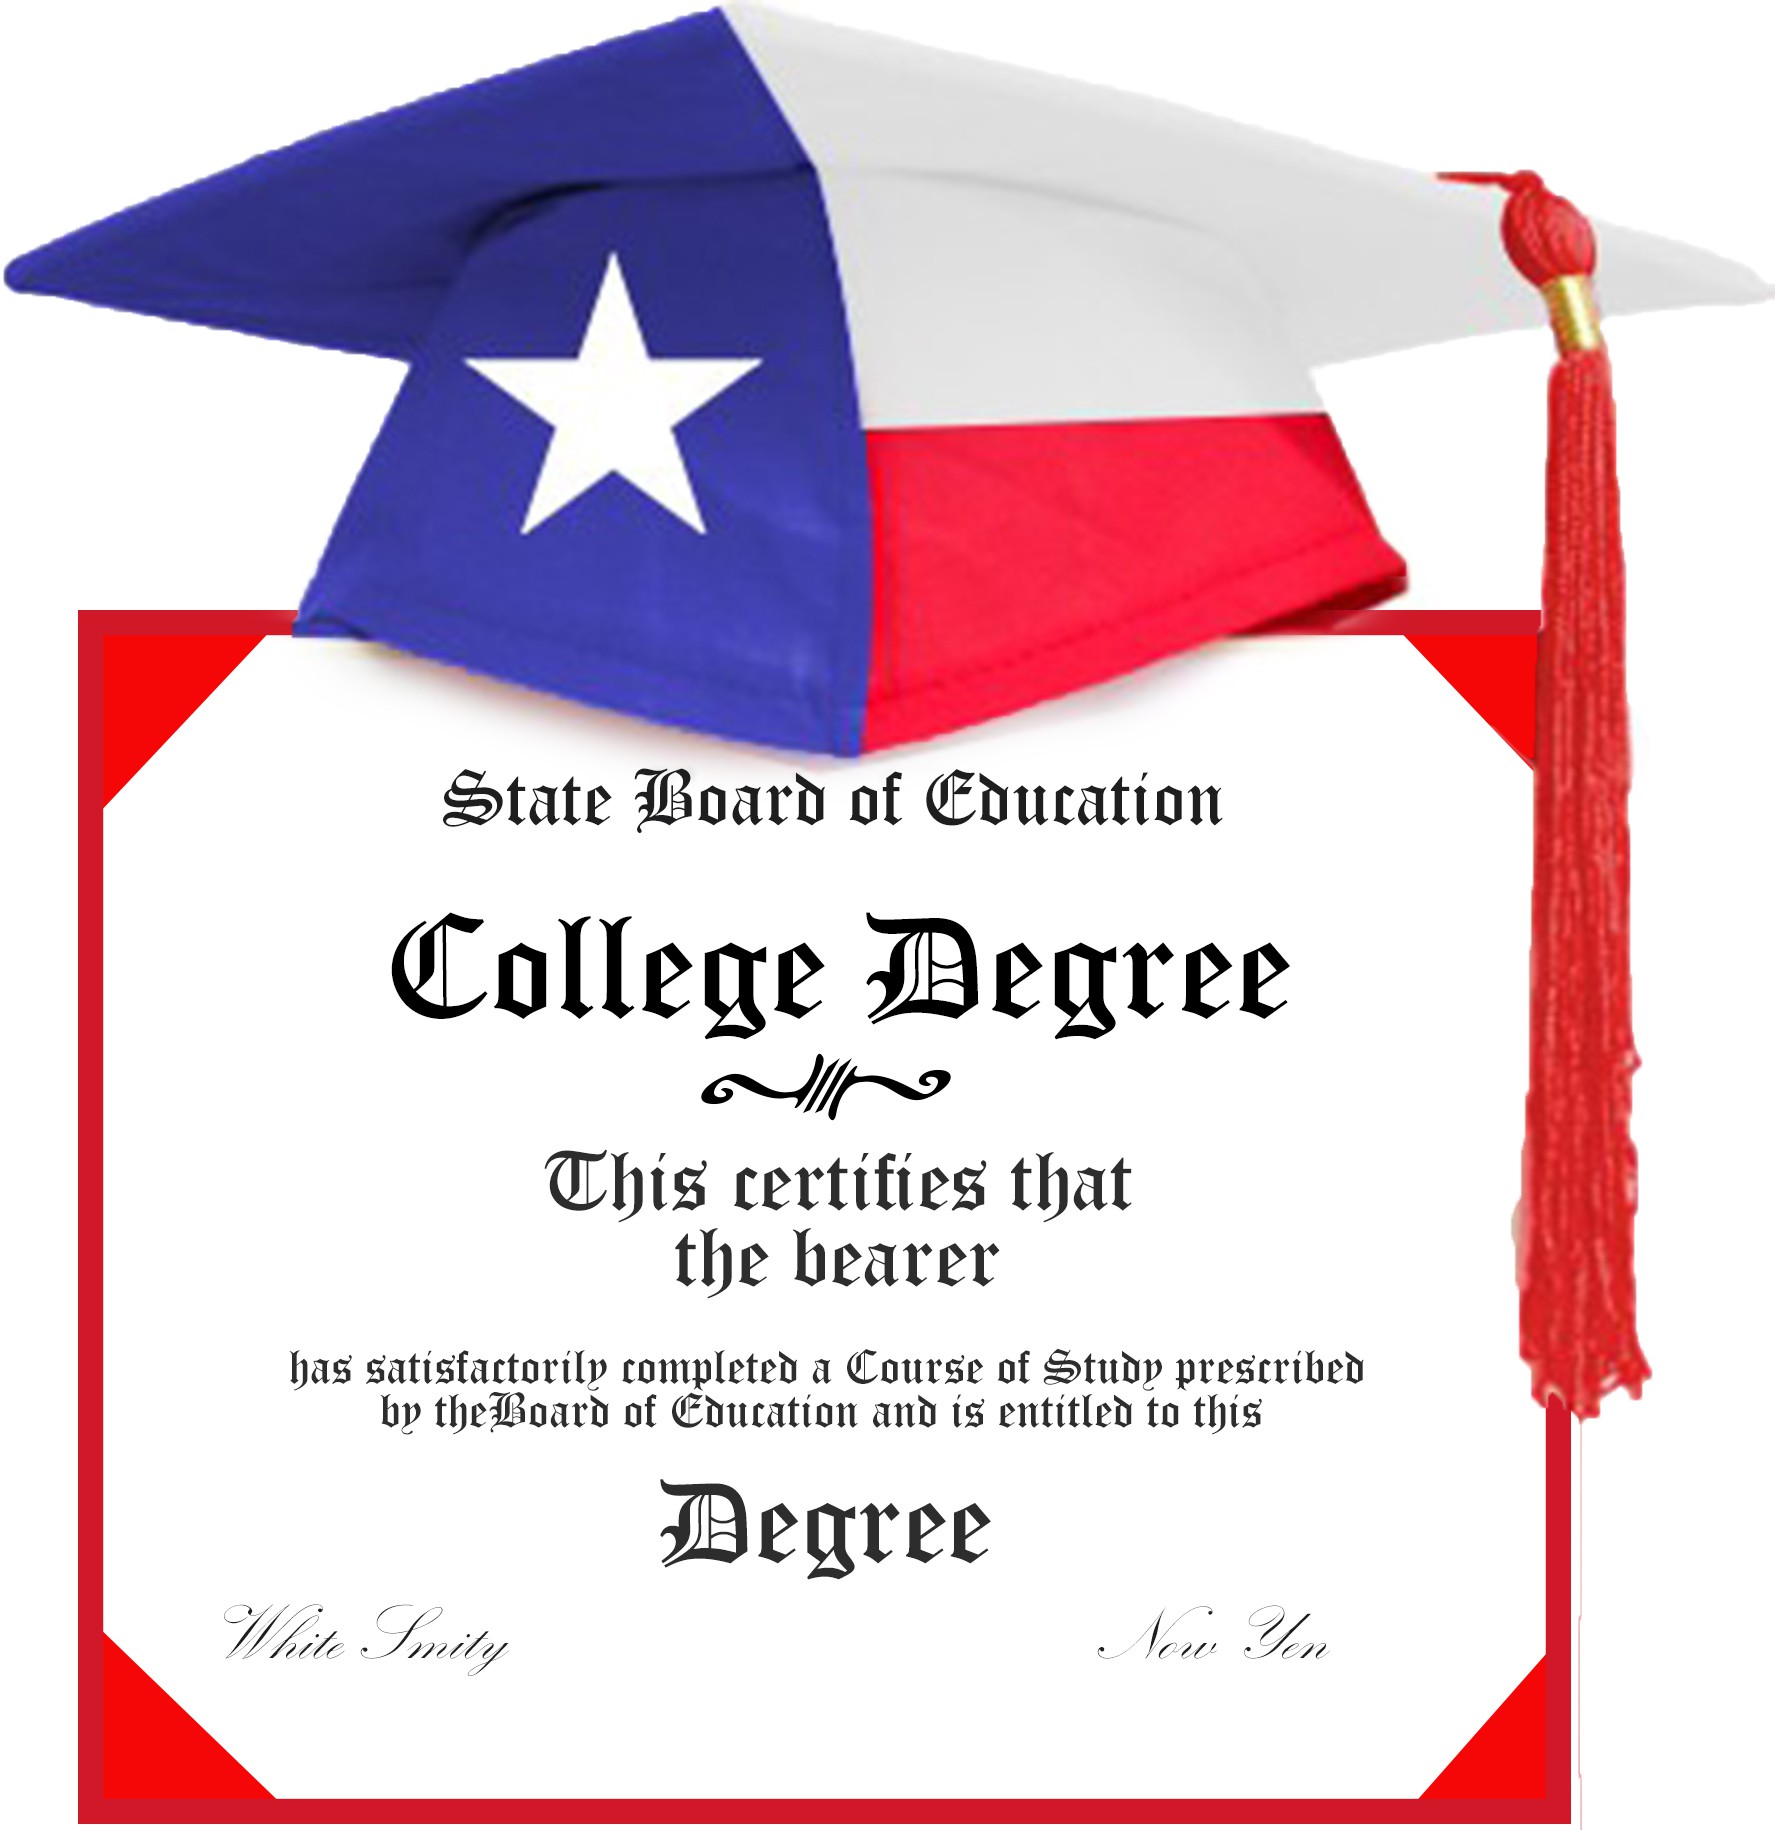 The University of Texas at Austin College Degree